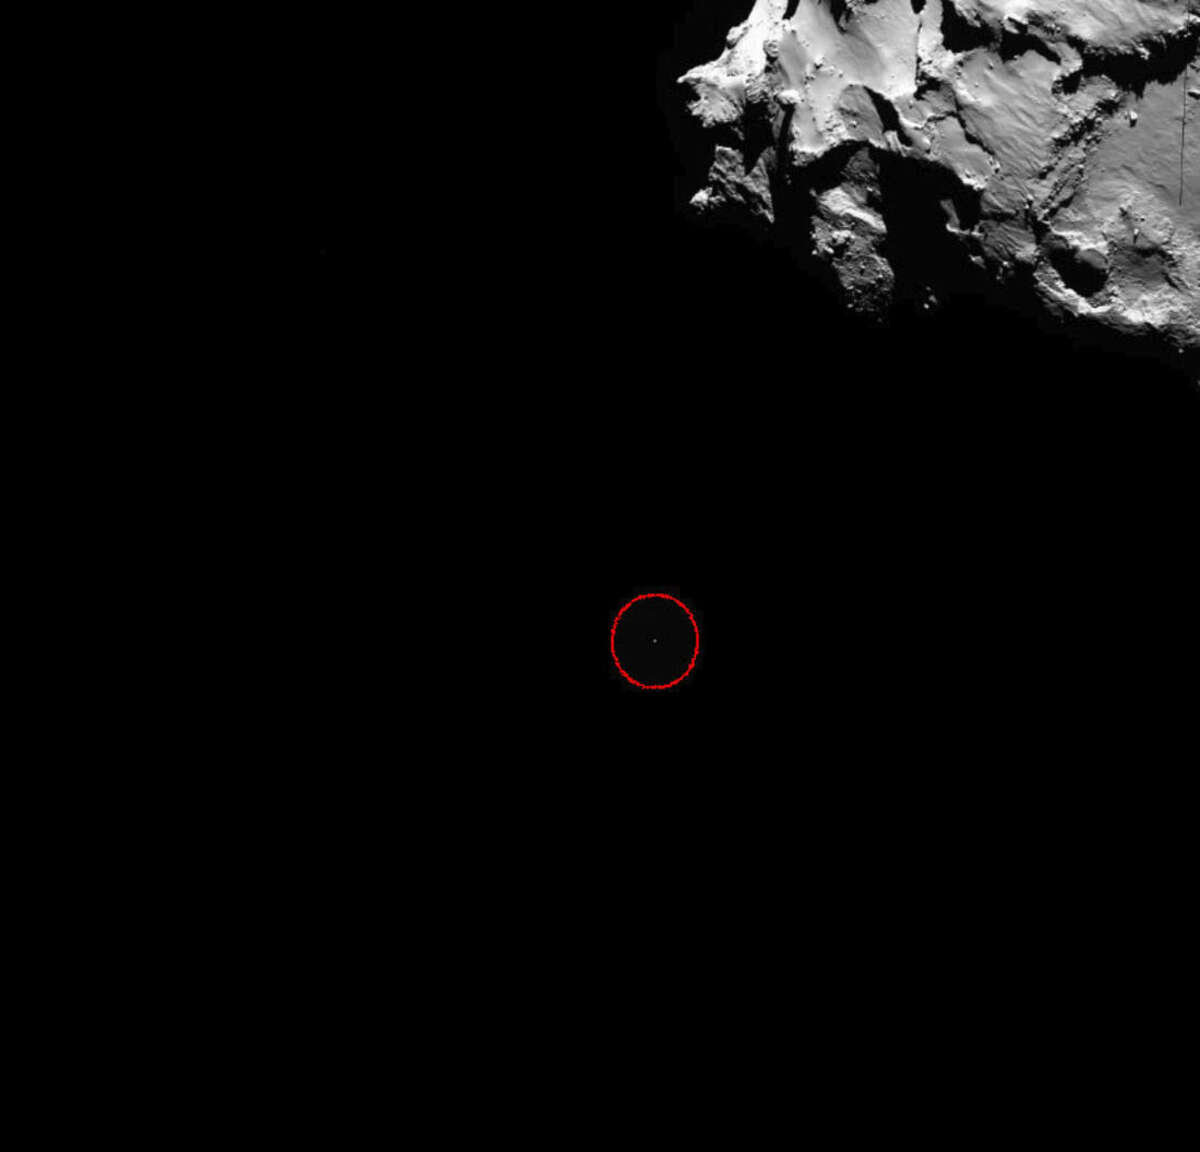 Rosetta's OSIRIS wide-angle camera image released by the European Space Agency ESA on Thursday Nov. 13, 2014 shows the position of Rosetta’s lander Philae Wednesday, before it landed on the surface of Comet 67P/Churyumov-Gerasimenko. Source digitally added a circle to mark the landers location. The lander scored a historic first Wednesday, touching down on comet 67P/Churyumov-Gerasimenko after a decade-long, 6.4 billion-kilometer (4 billion-mile) journey through space aboard its mother ship, Rosetta. The comet is streaking through space at 41,000 mph (66,000 kph) some 311 million miles (500 million kilometers) from Earth. (AP Photo/Esa/Rosetta/Philae)